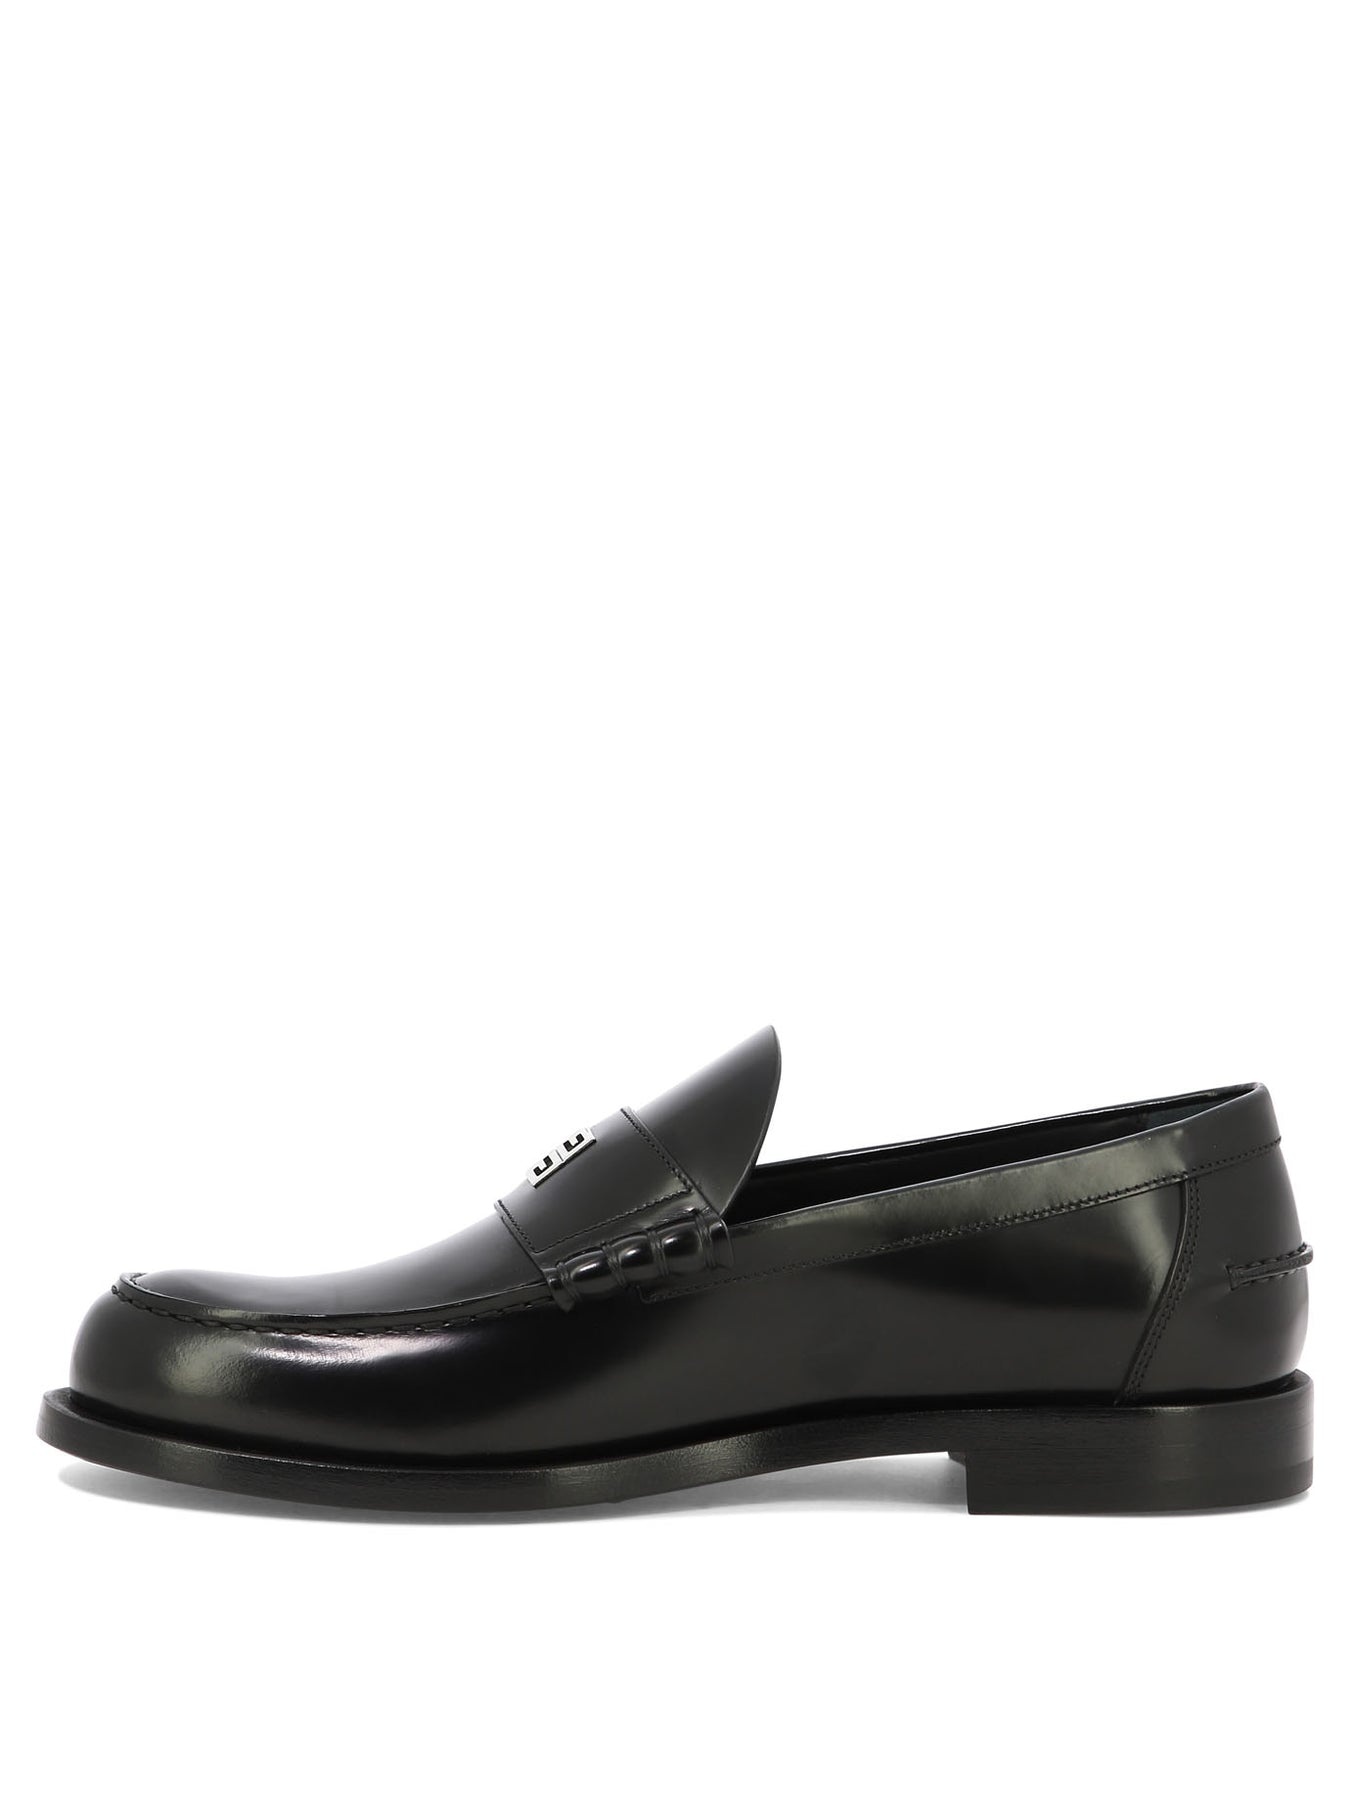 Mr G Loafers & Slippers Black - 3